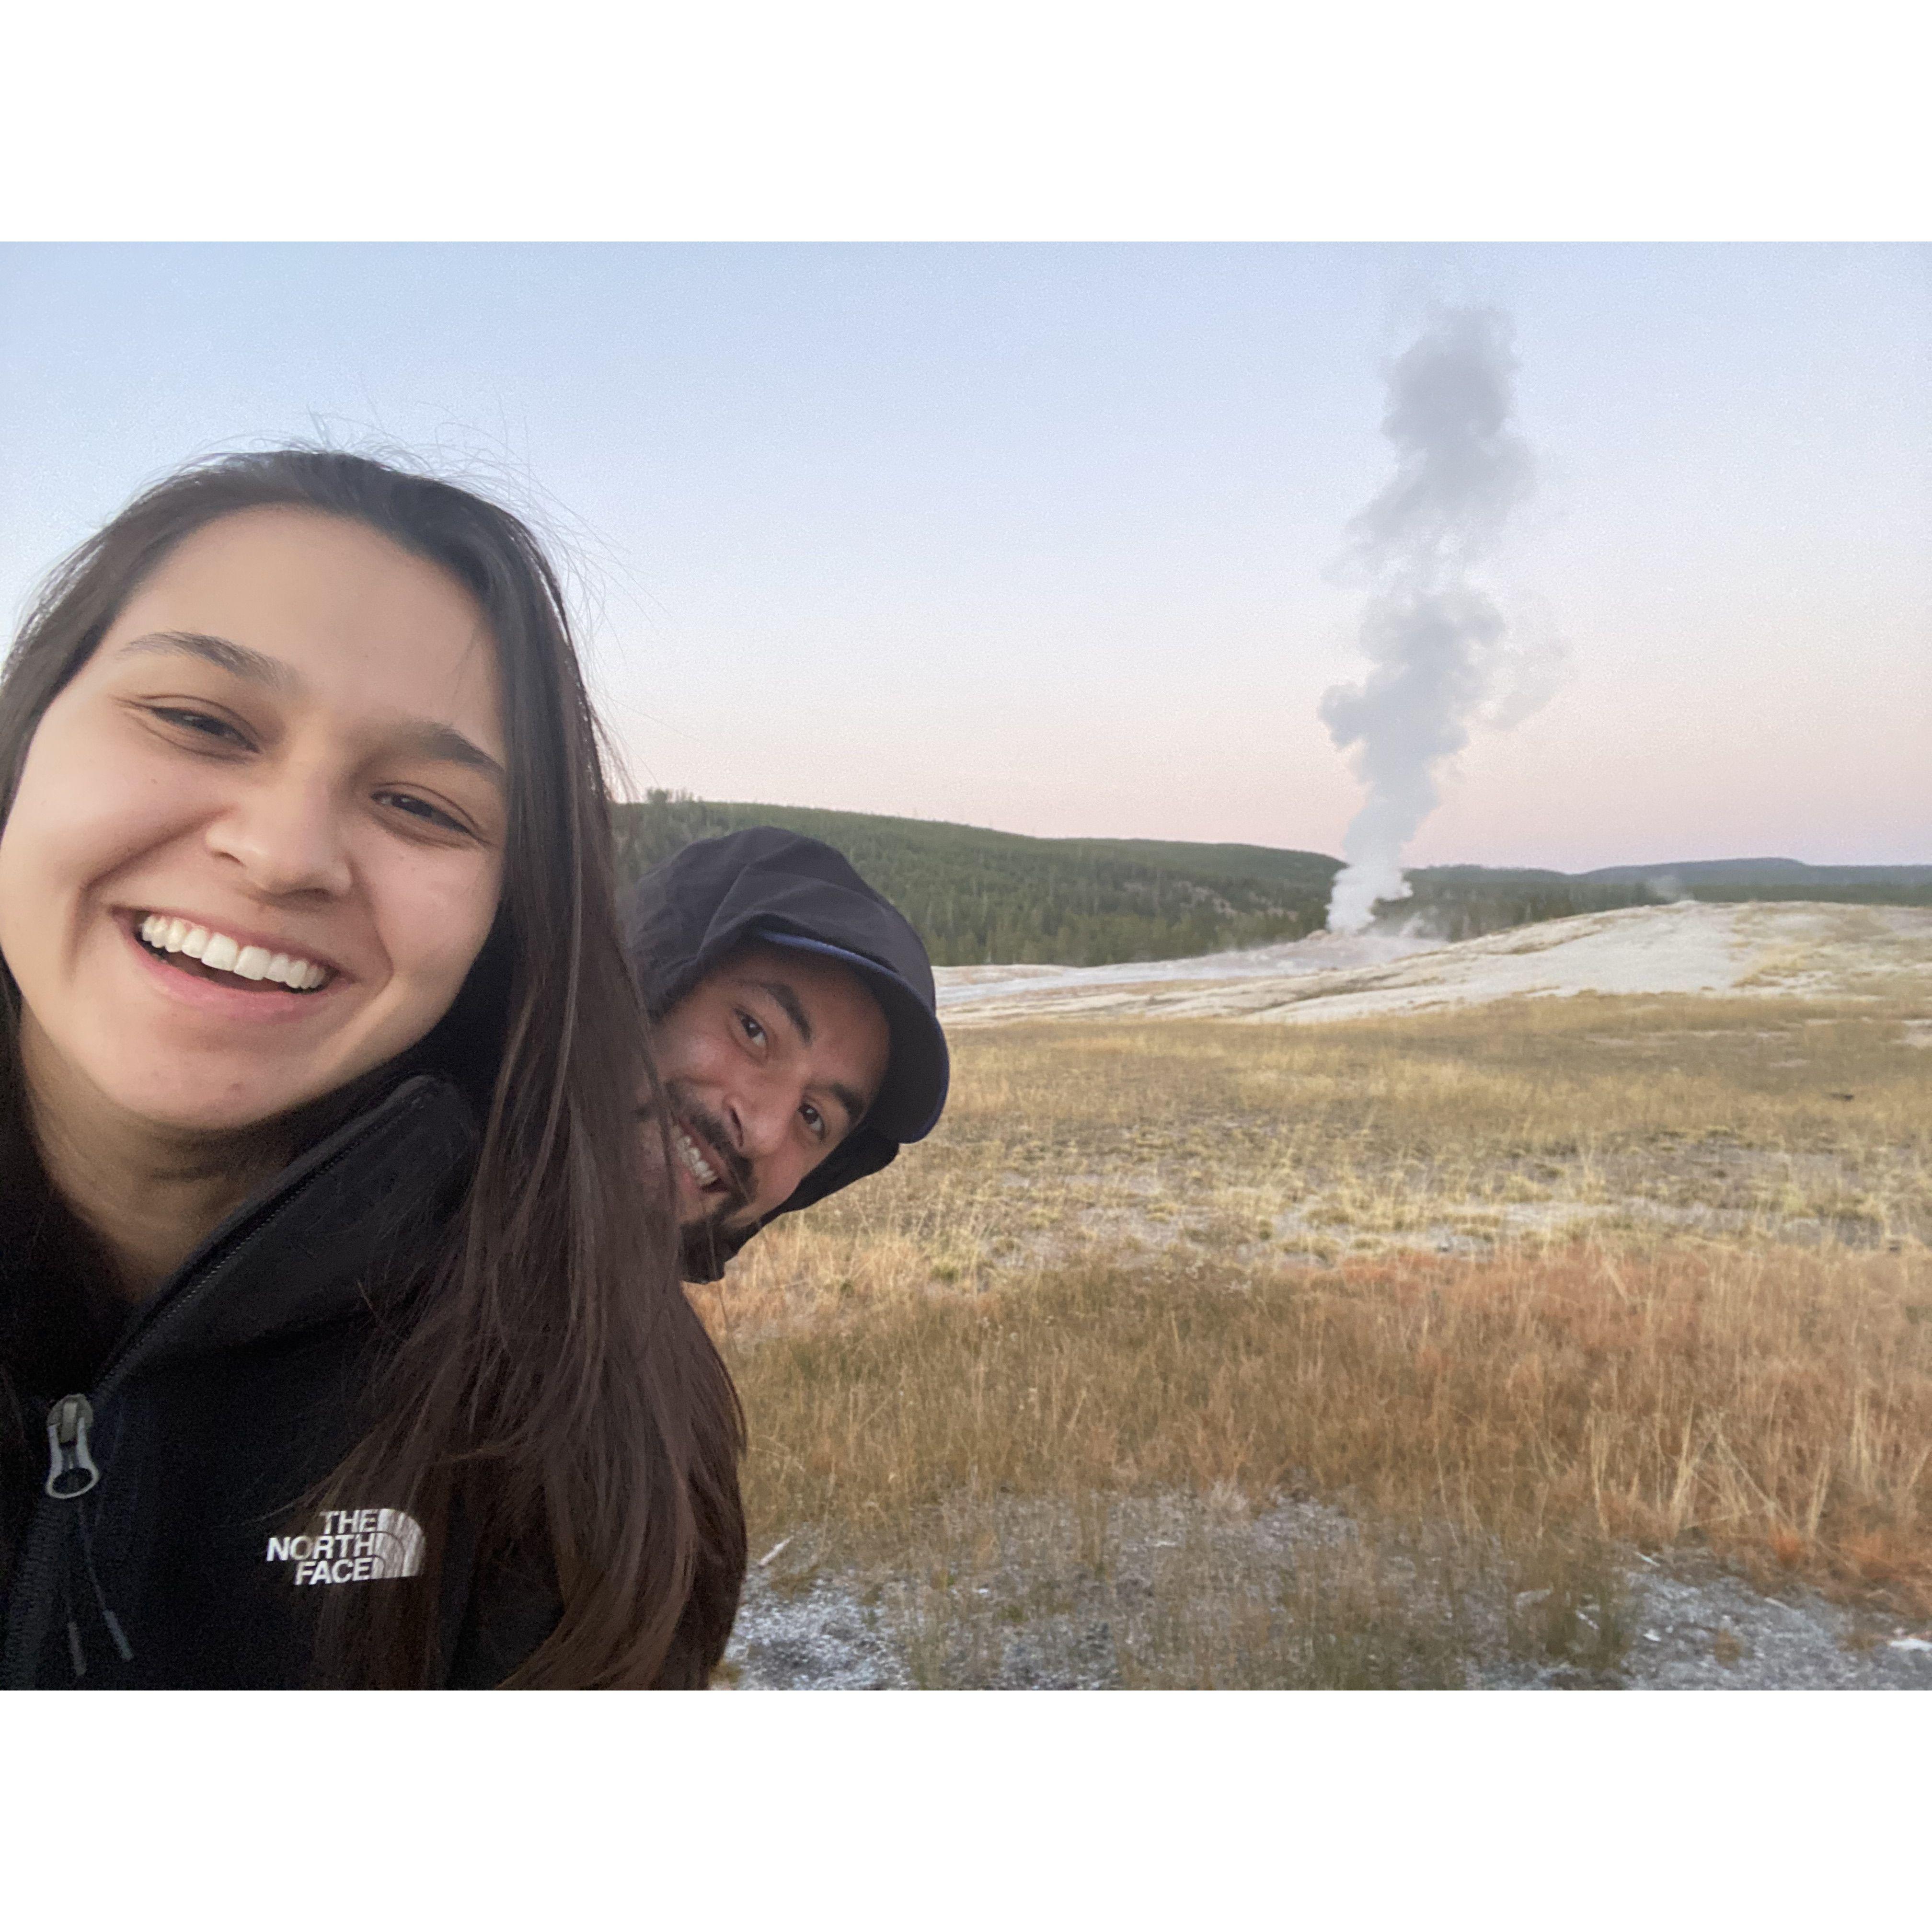 Our first roadtrip together from Seattle to Wyoming to see geysers at Yellowstone National Park